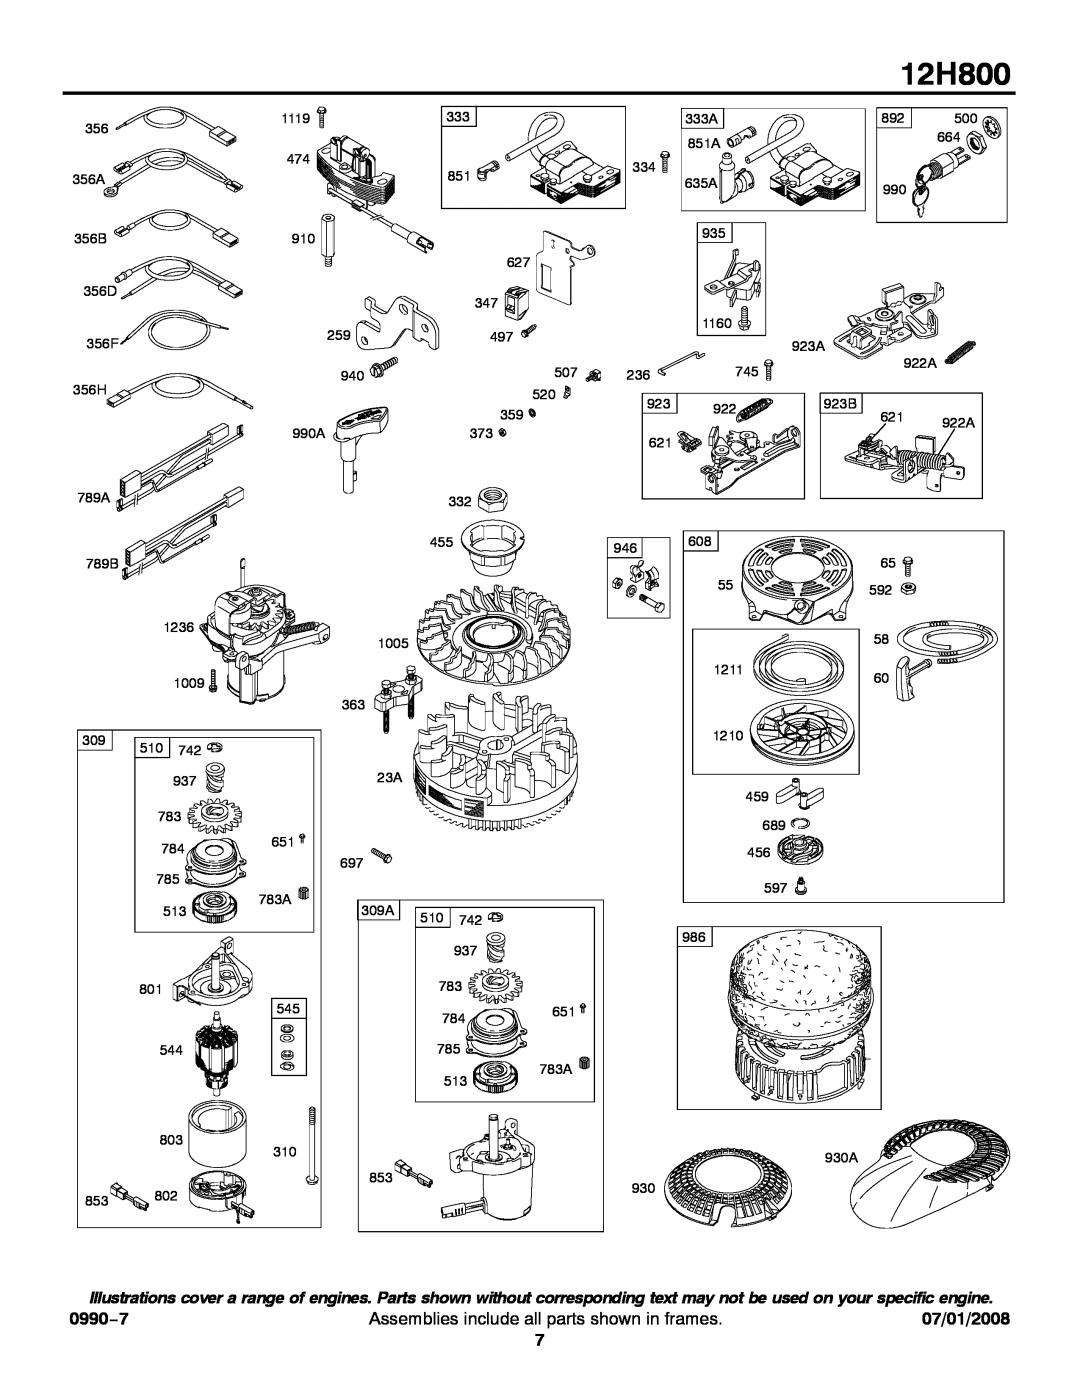 Briggs & Stratton 12H800 service manual 0990−7, Assemblies include all parts shown in frames, 07/01/2008 